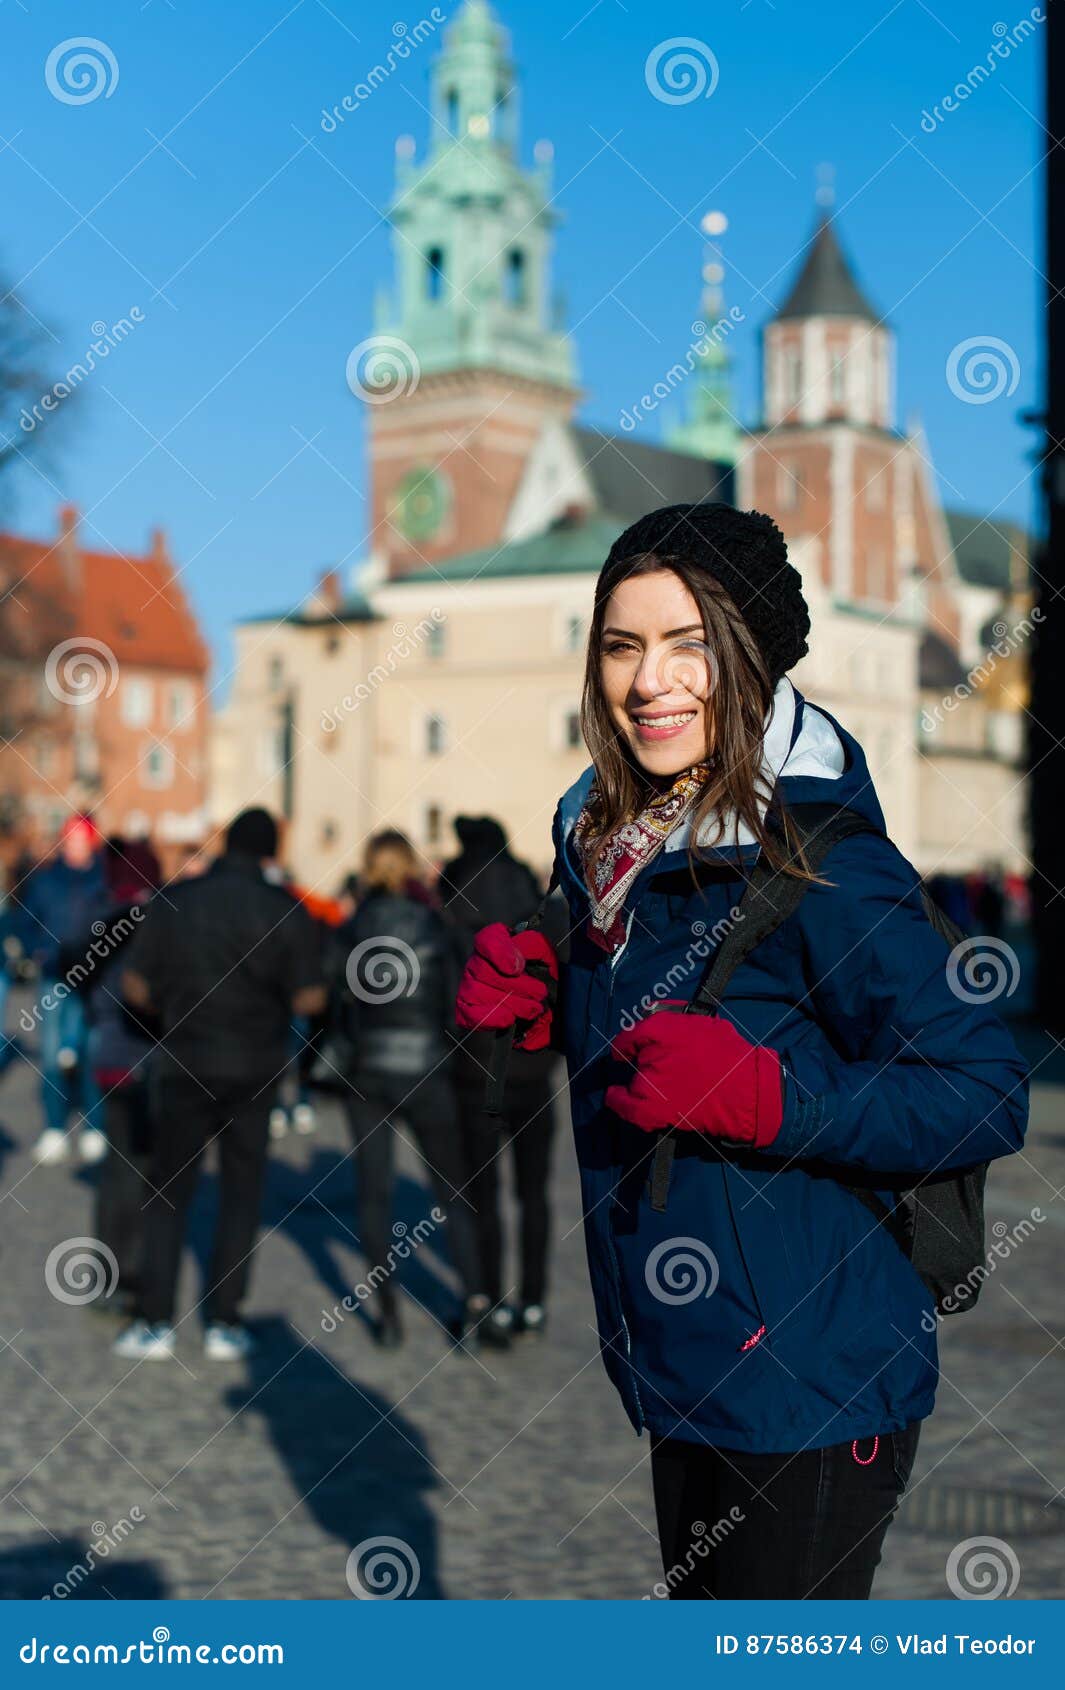 young woman tourist in the city of kracow